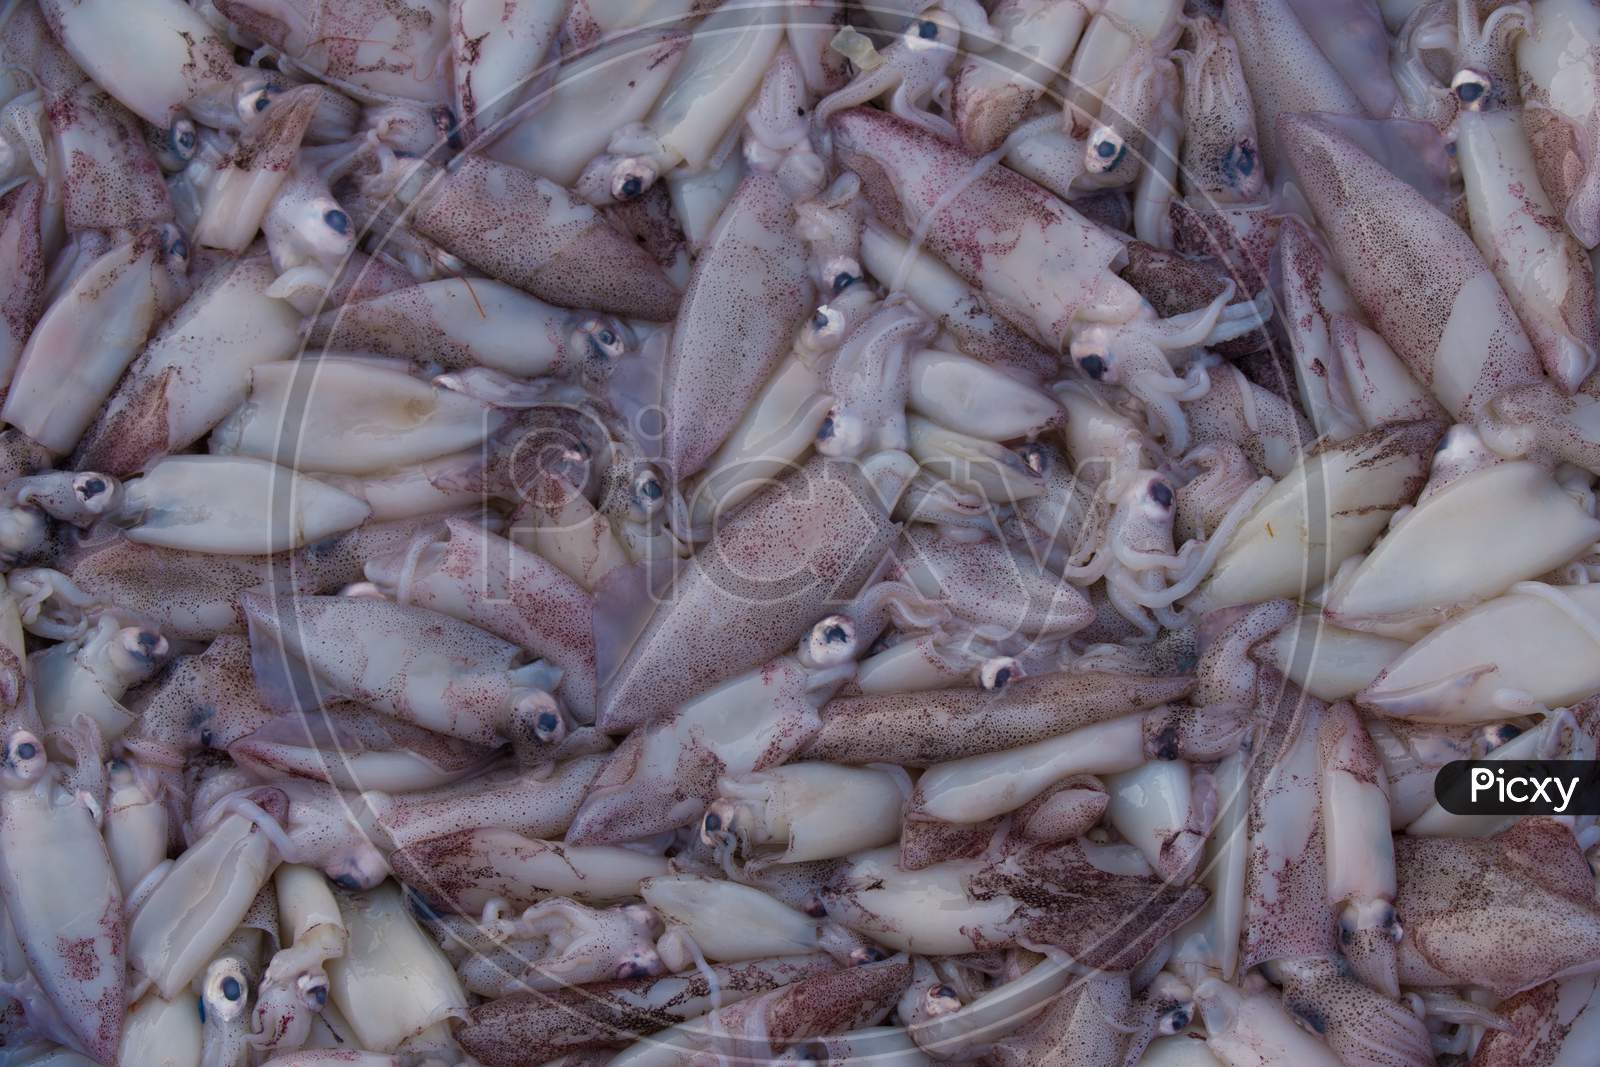 Collection Of Squid Seafood For Sale In The Market.